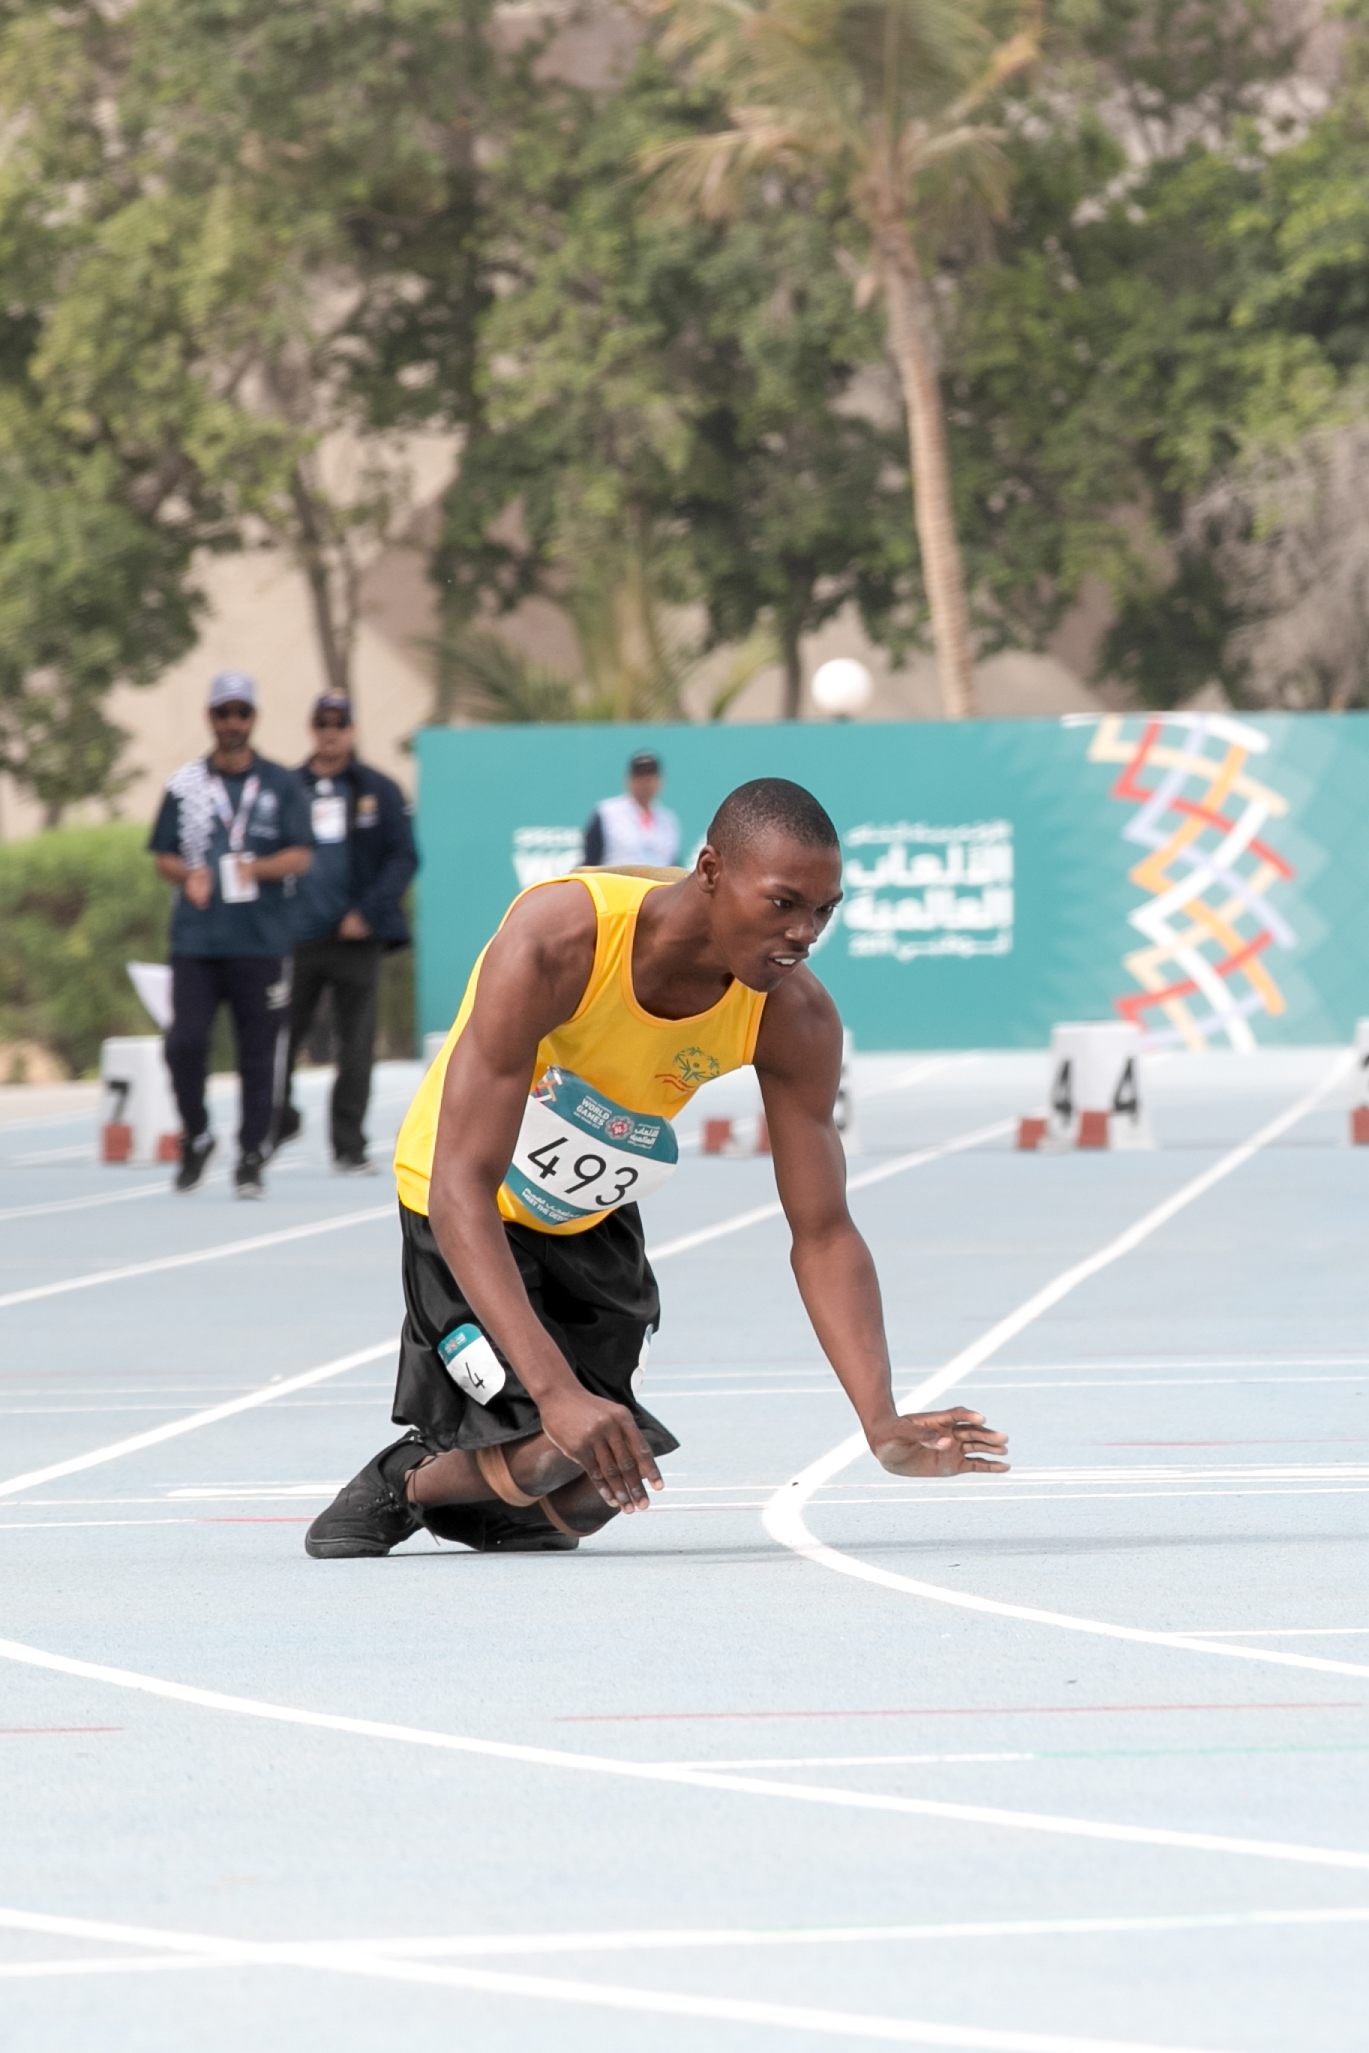 Jamaica's Kirk Wint competes in the 50m sprint at the 2019 Special Olympics World Games